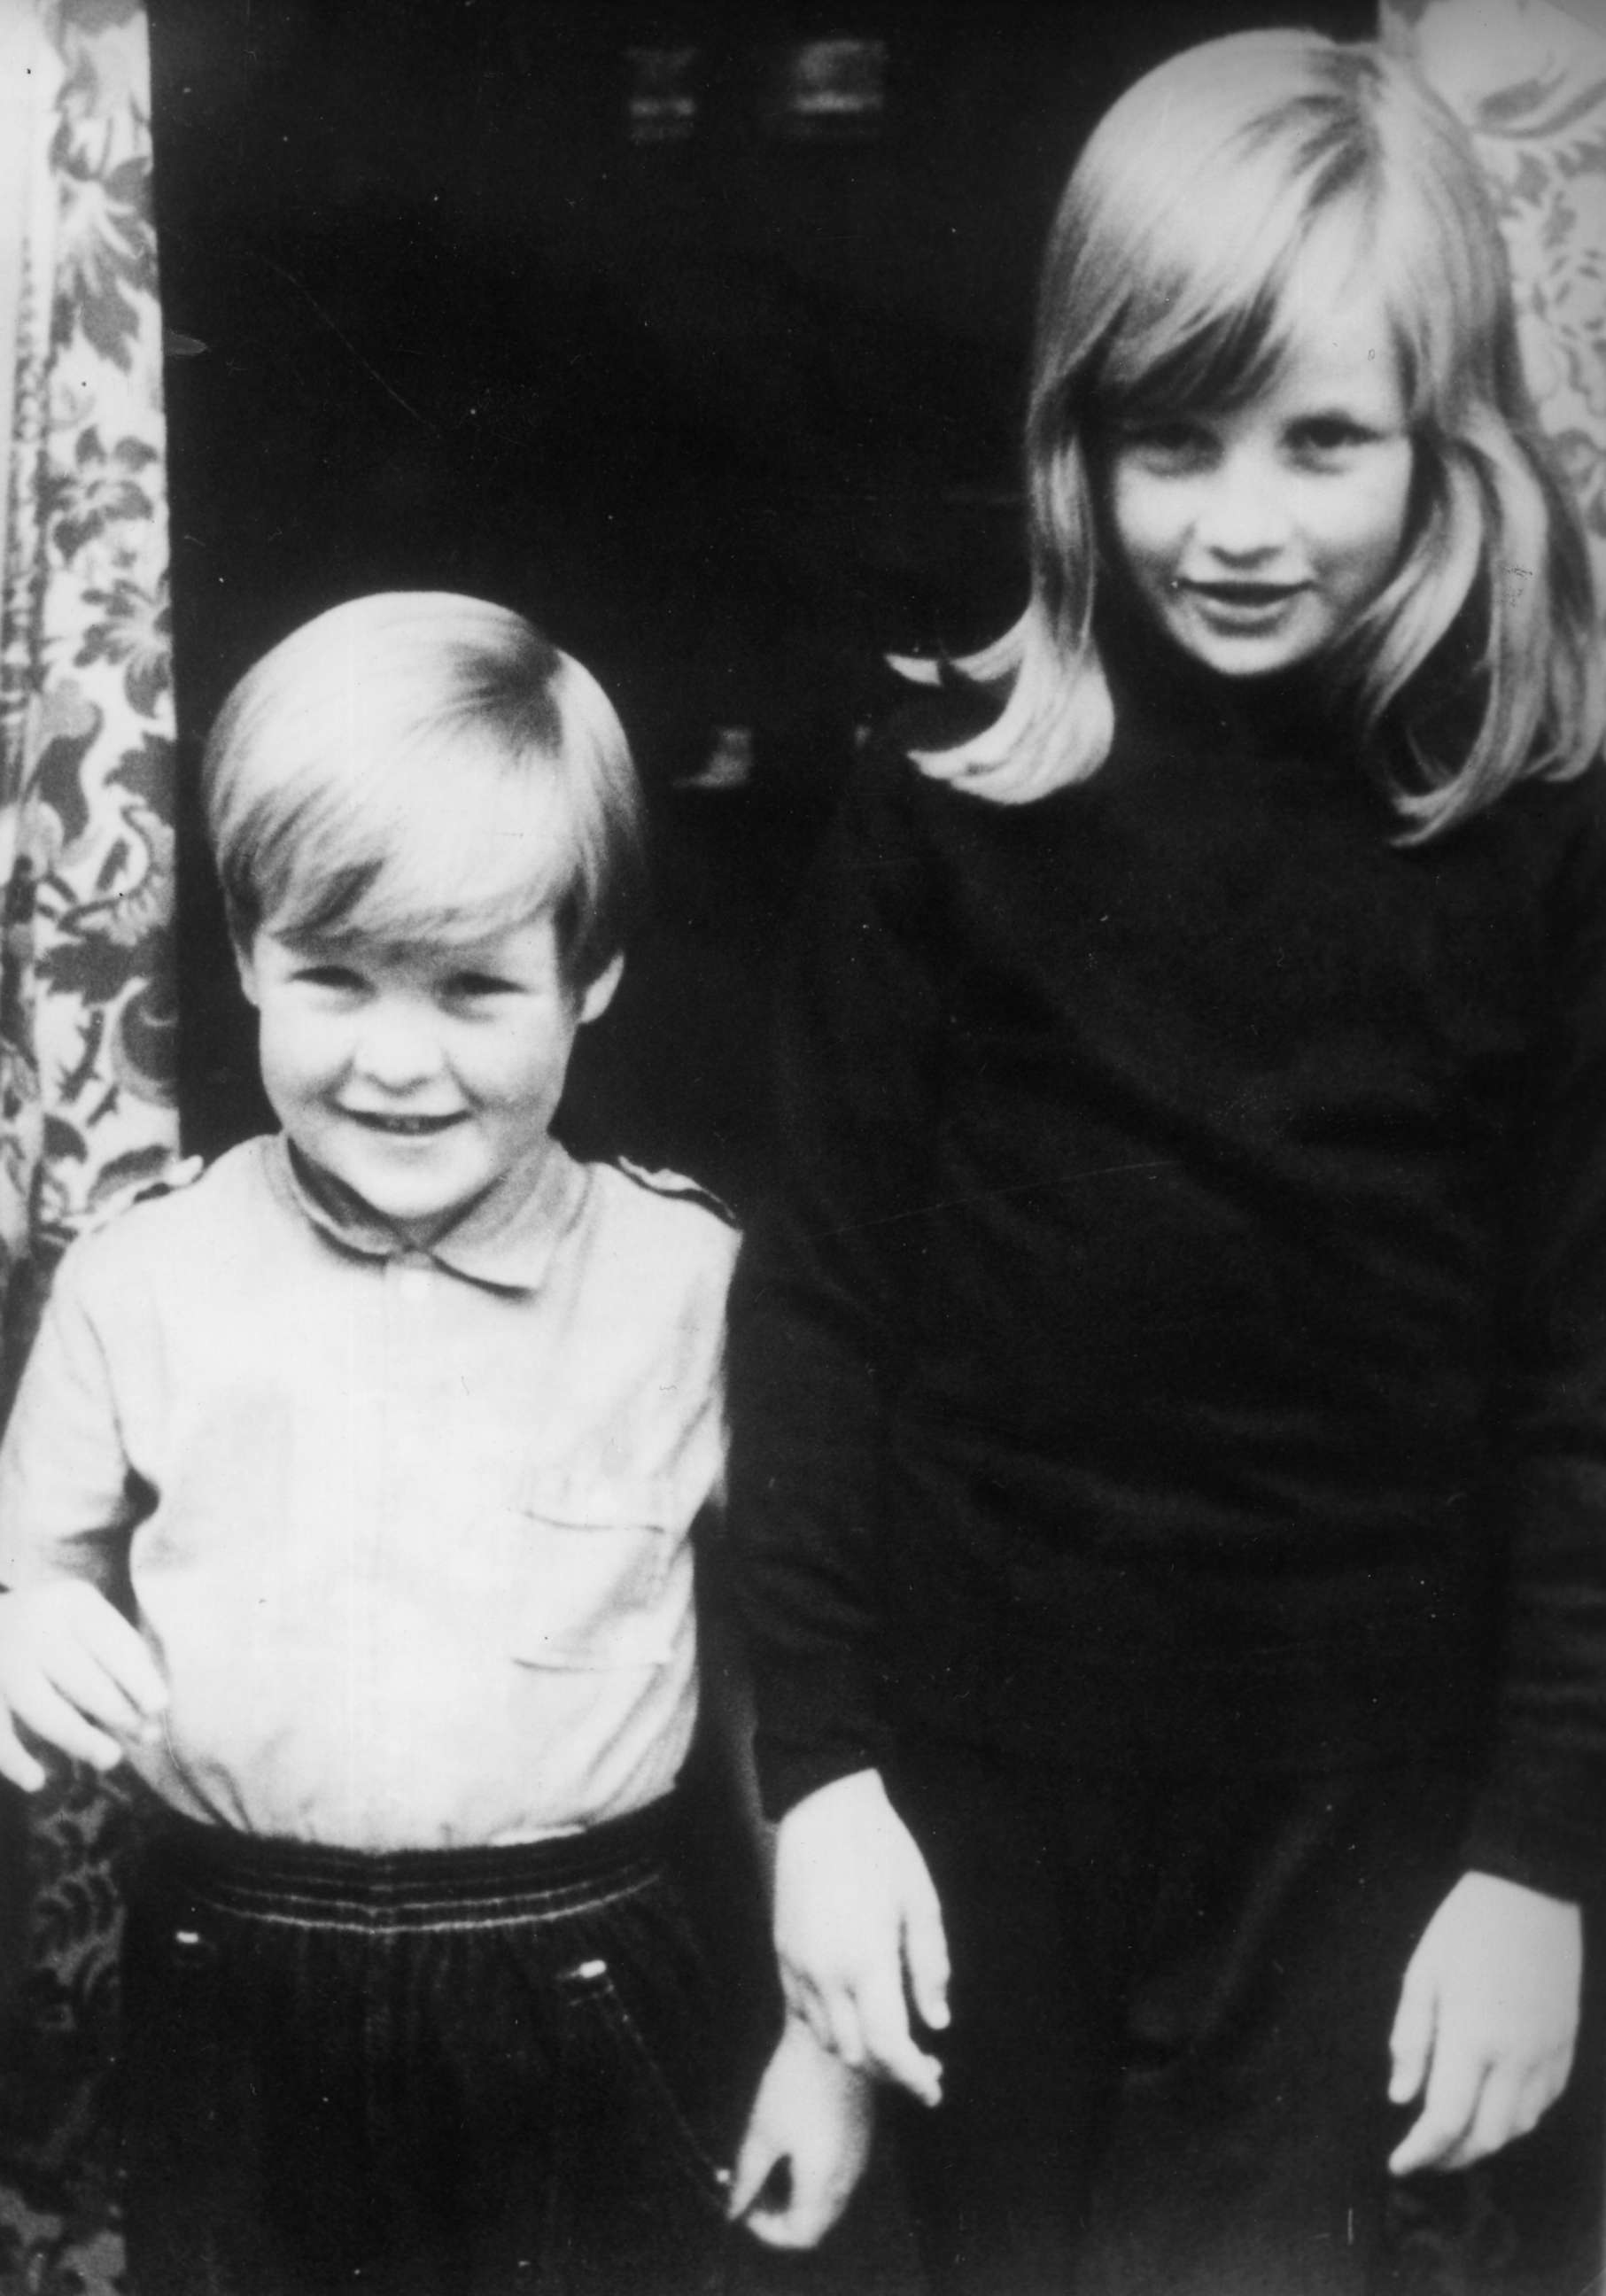 PHOTO: Lady Diana Spencer with her brother Charles (Earl Spencer) in Viscount Althorp, at their home in Berkshire, U.K., 1968.  